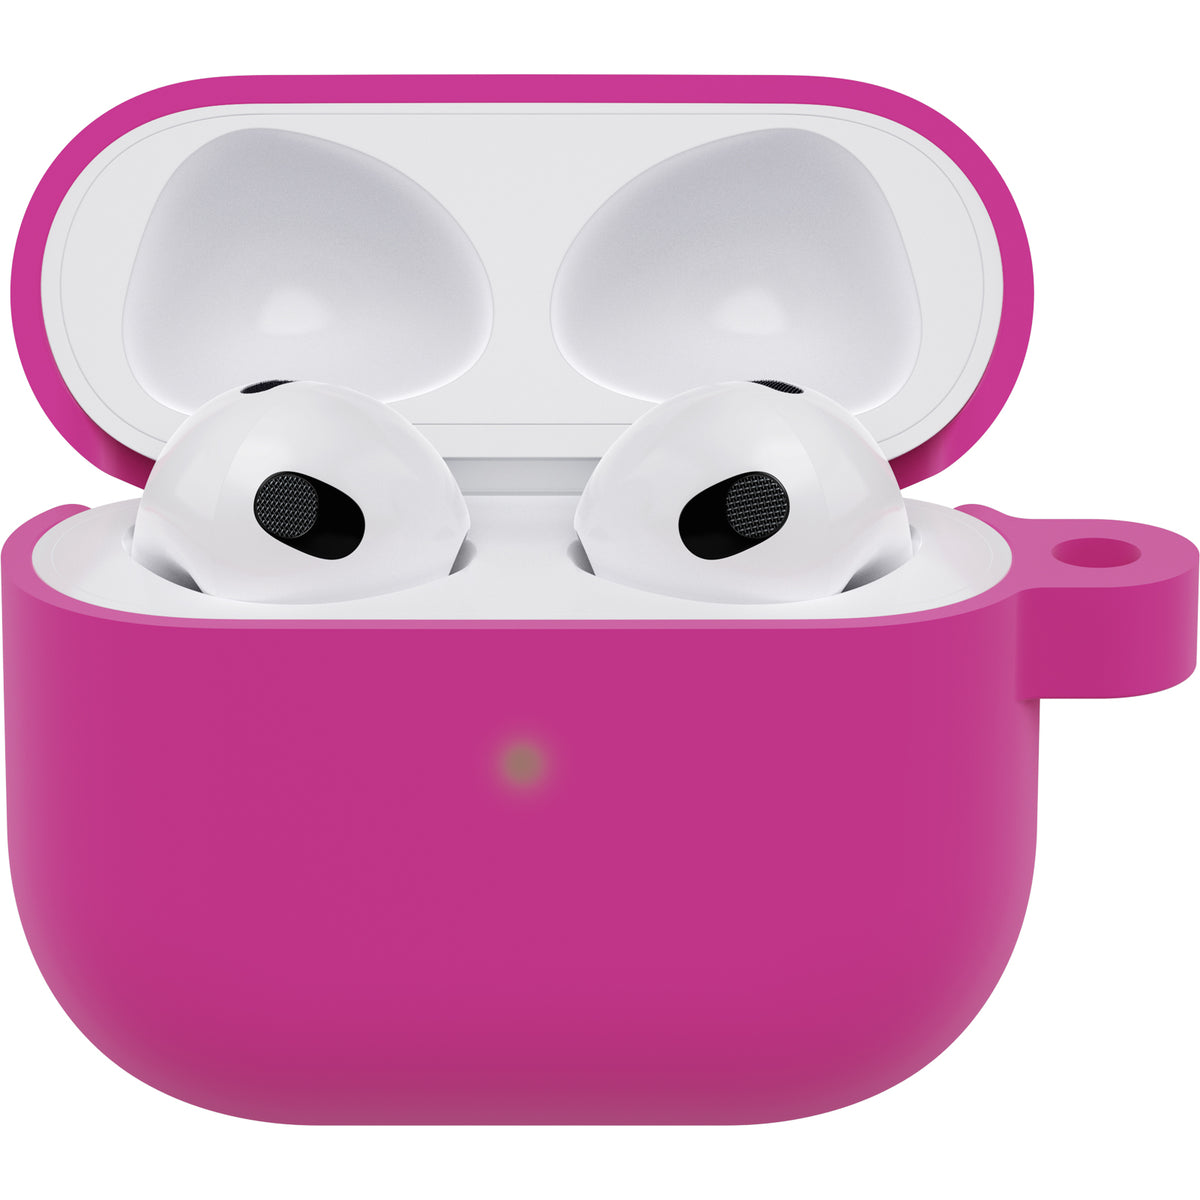 OTTERBOX Headphone Case for Apple Airpods 3rd Gen - Pink